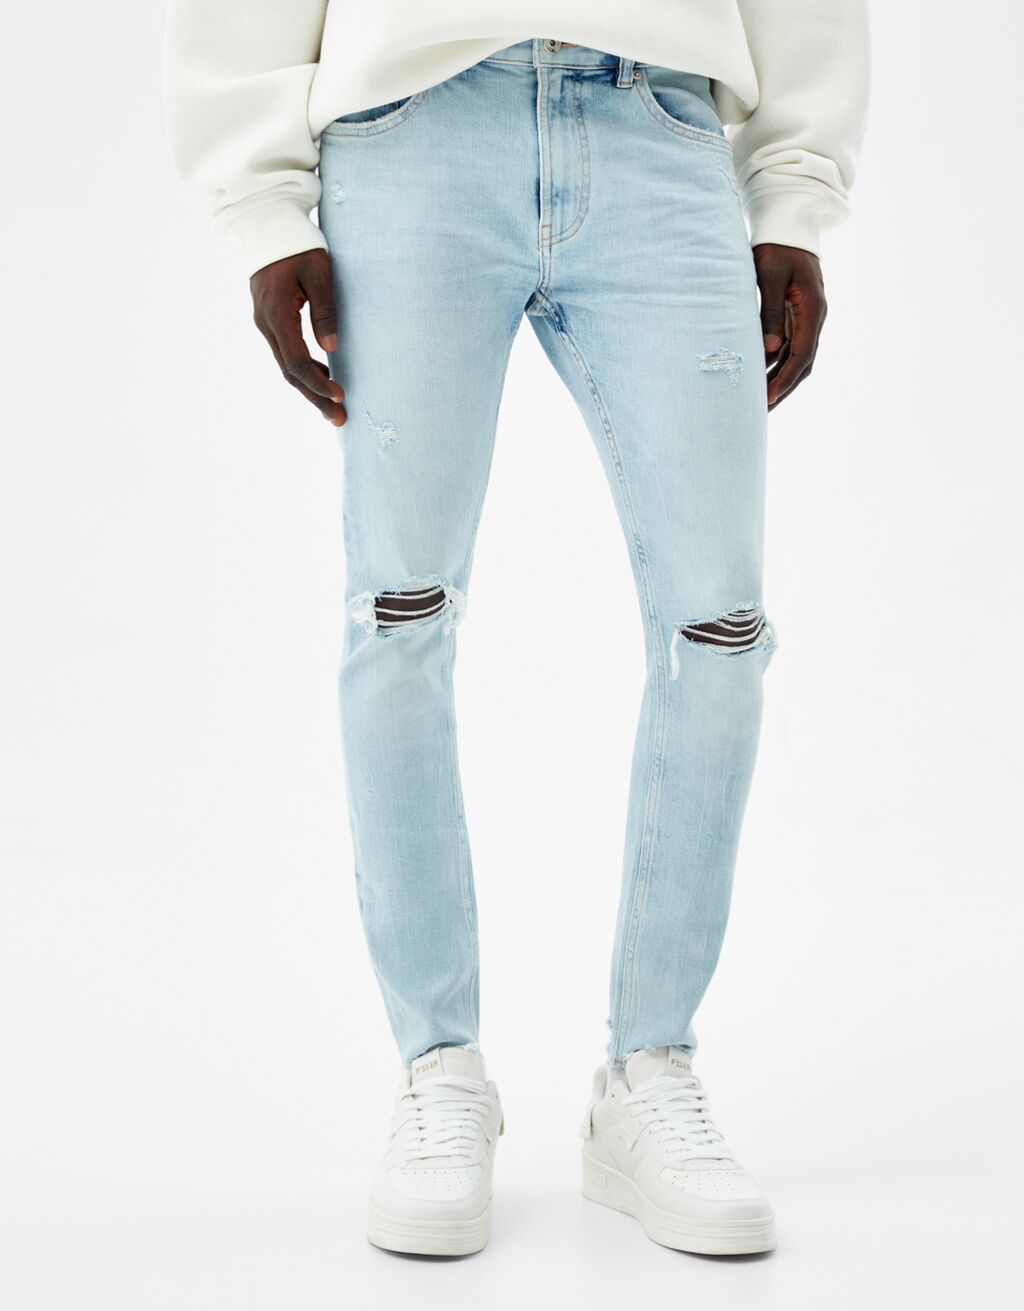 Super skinny ripped jeans